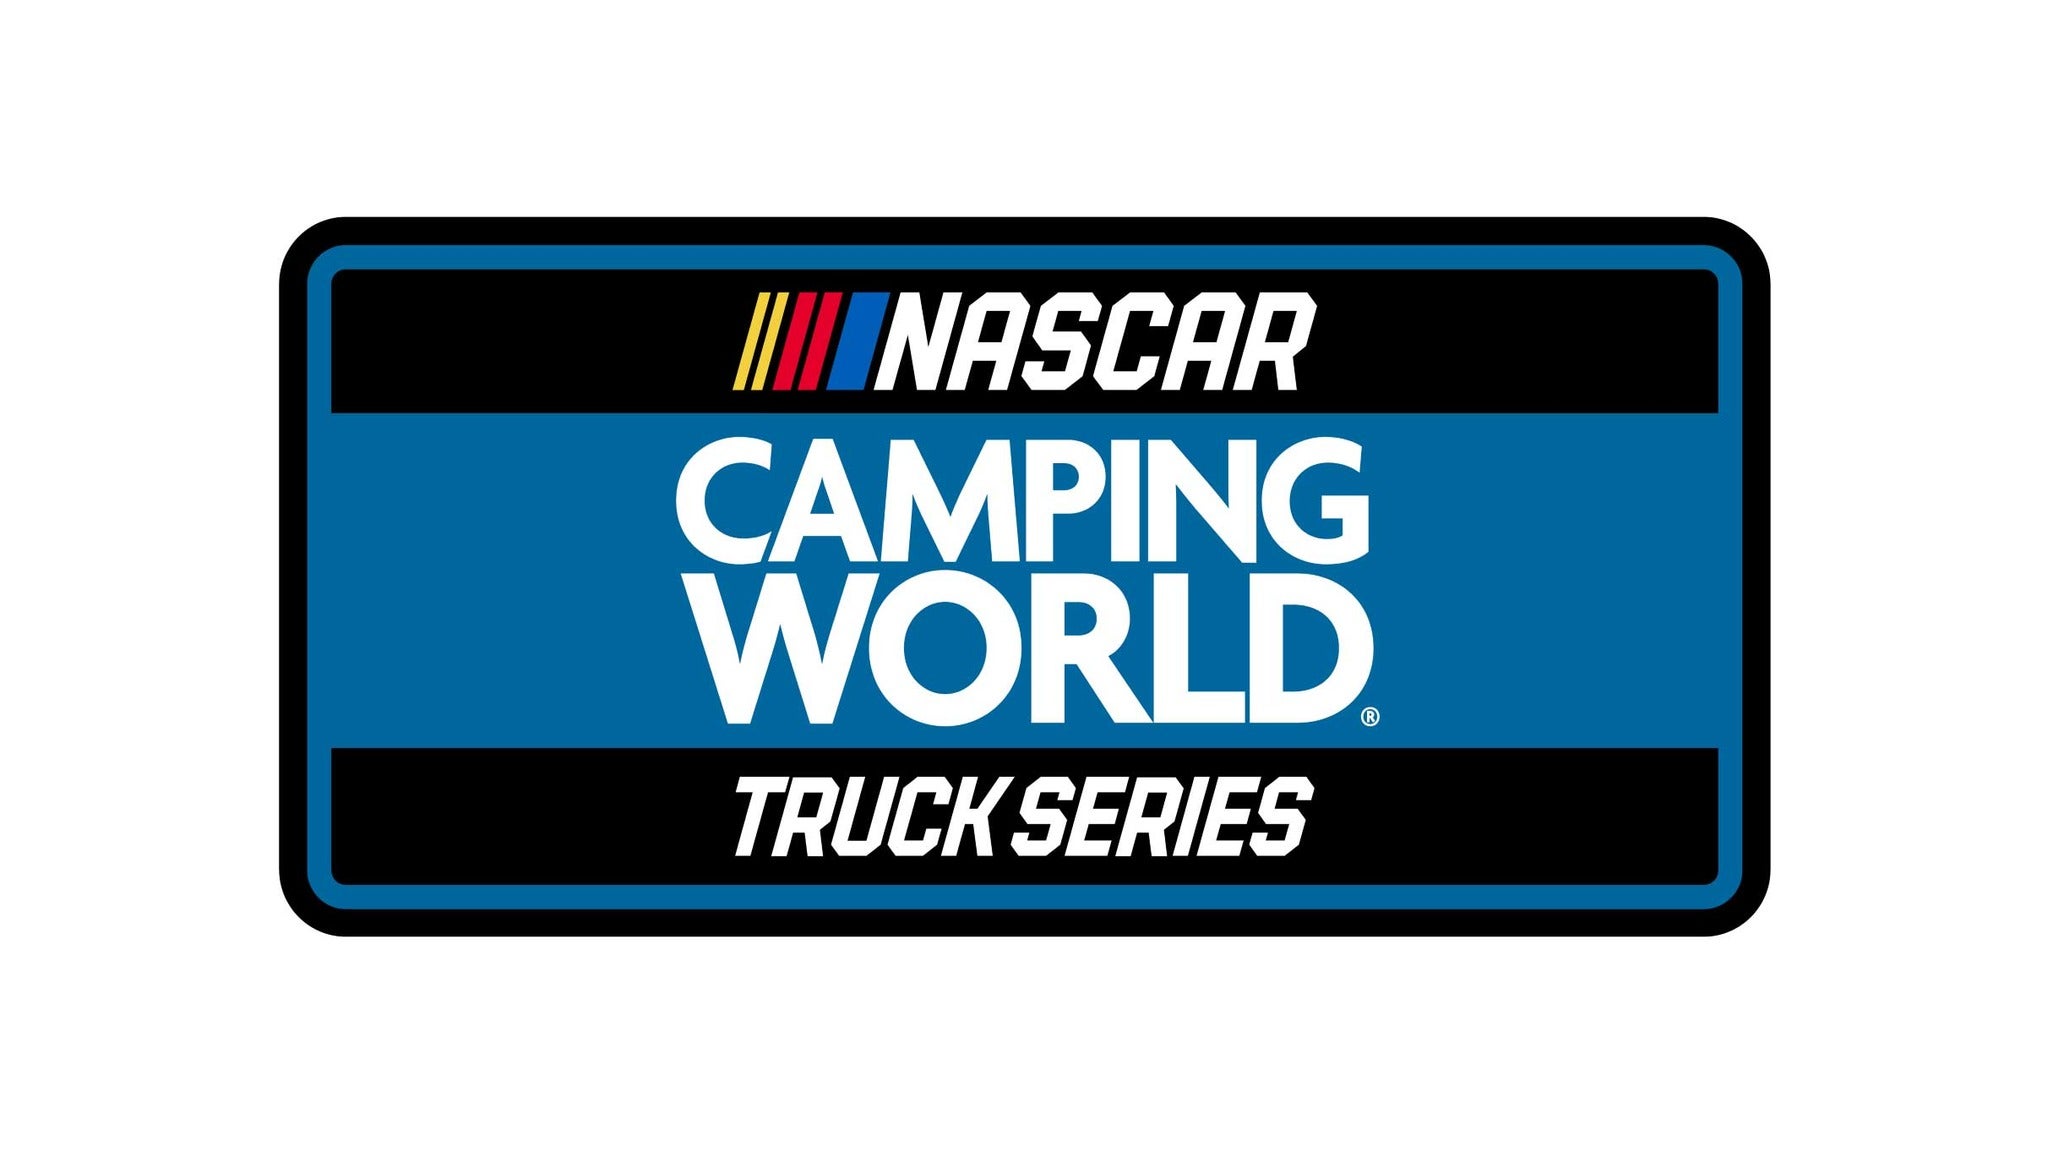 NASCAR Camping World Truck Series in Lebanon promo photo for Exclusive presale offer code